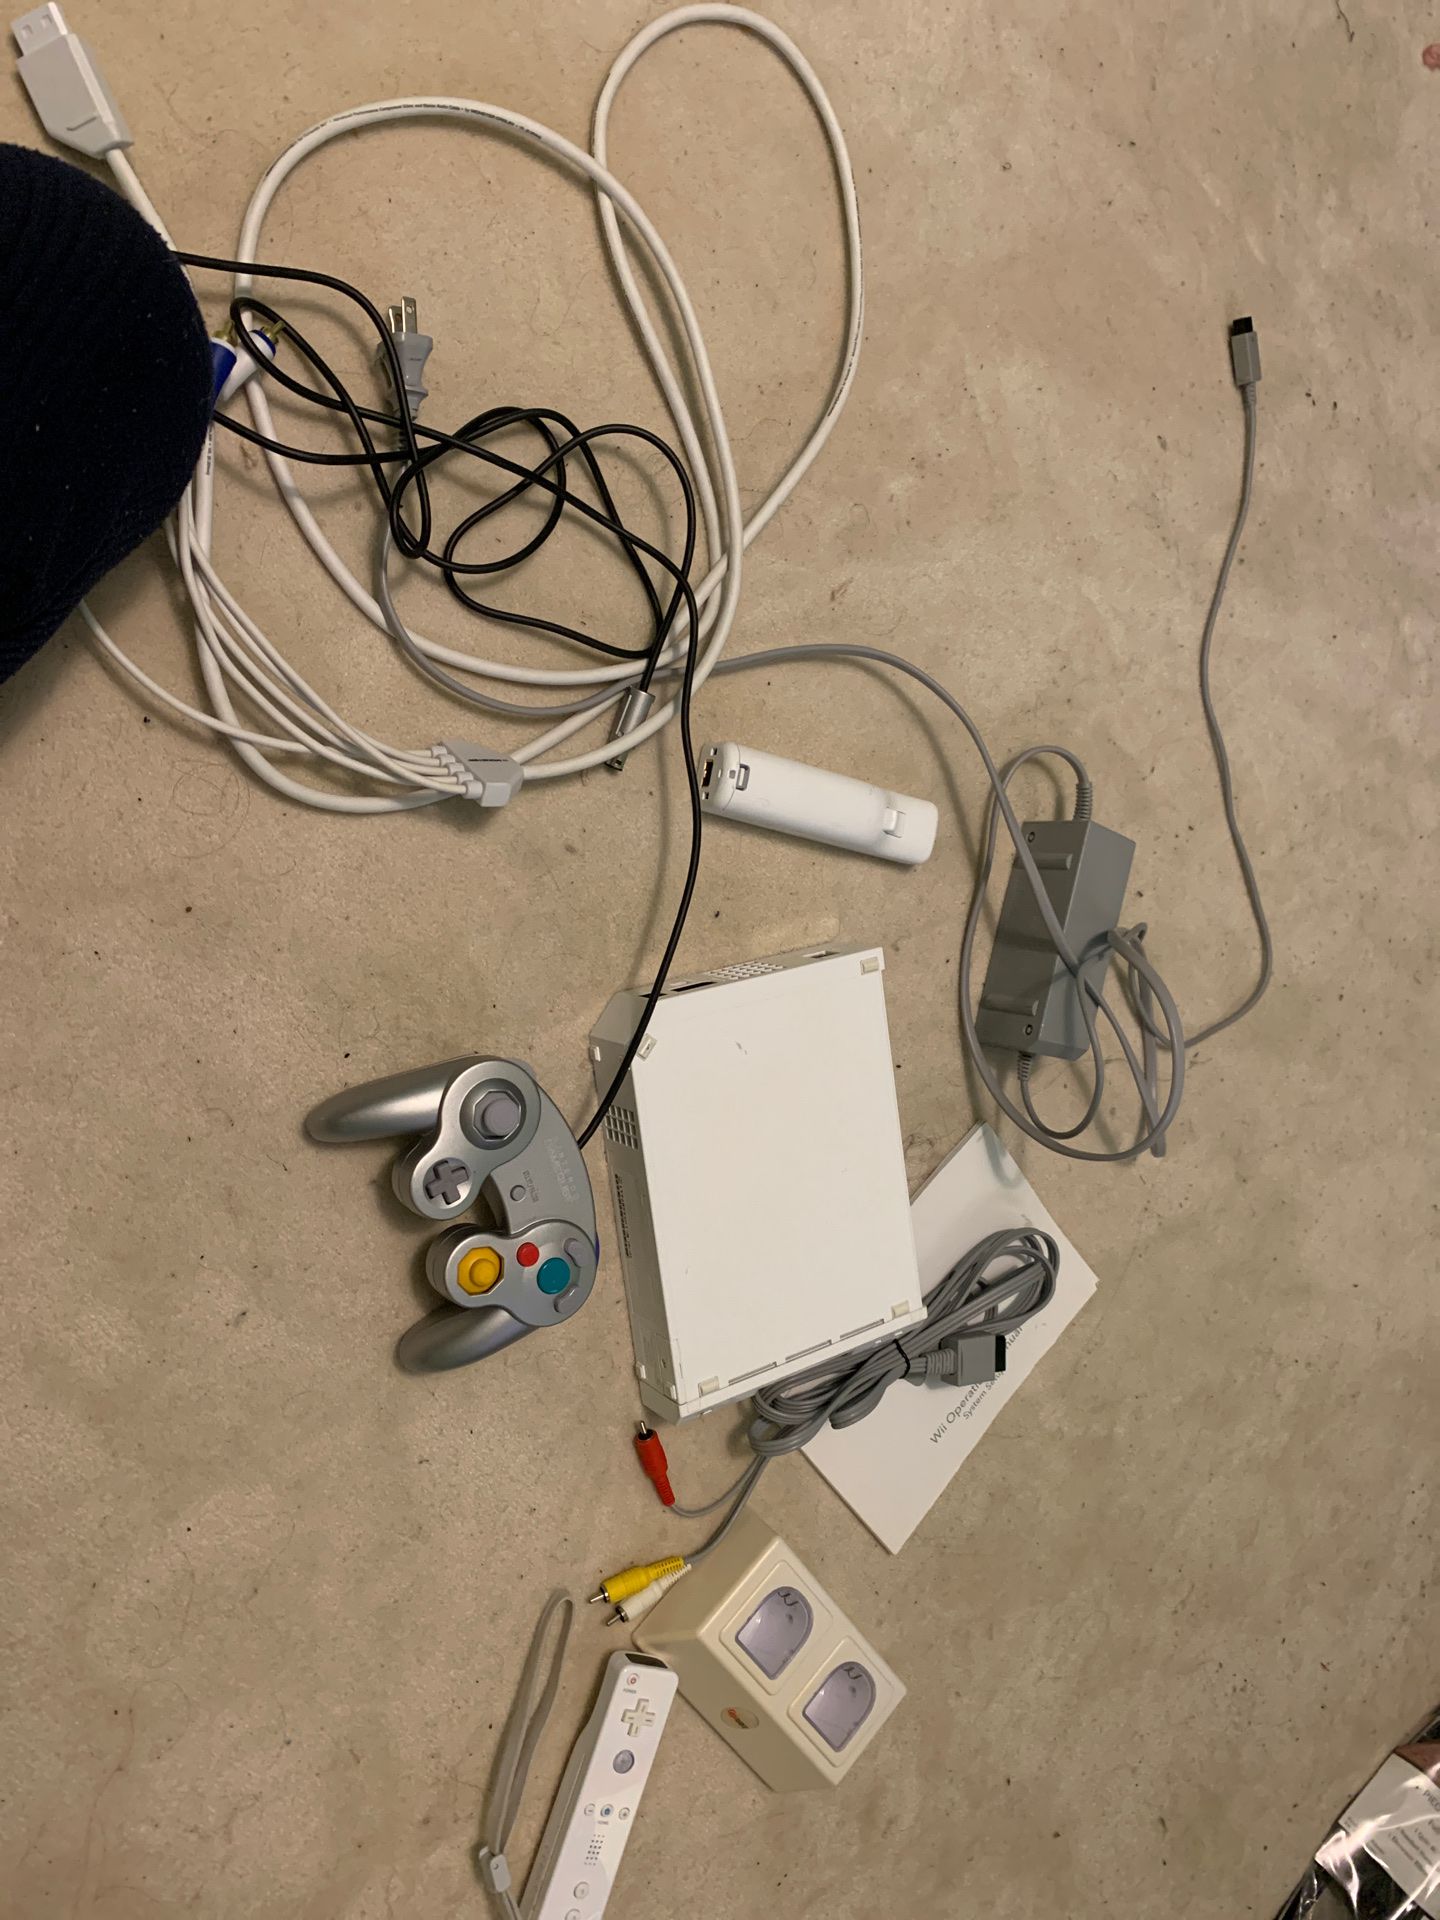 Wii U gaming console with wires and 2 controllers included